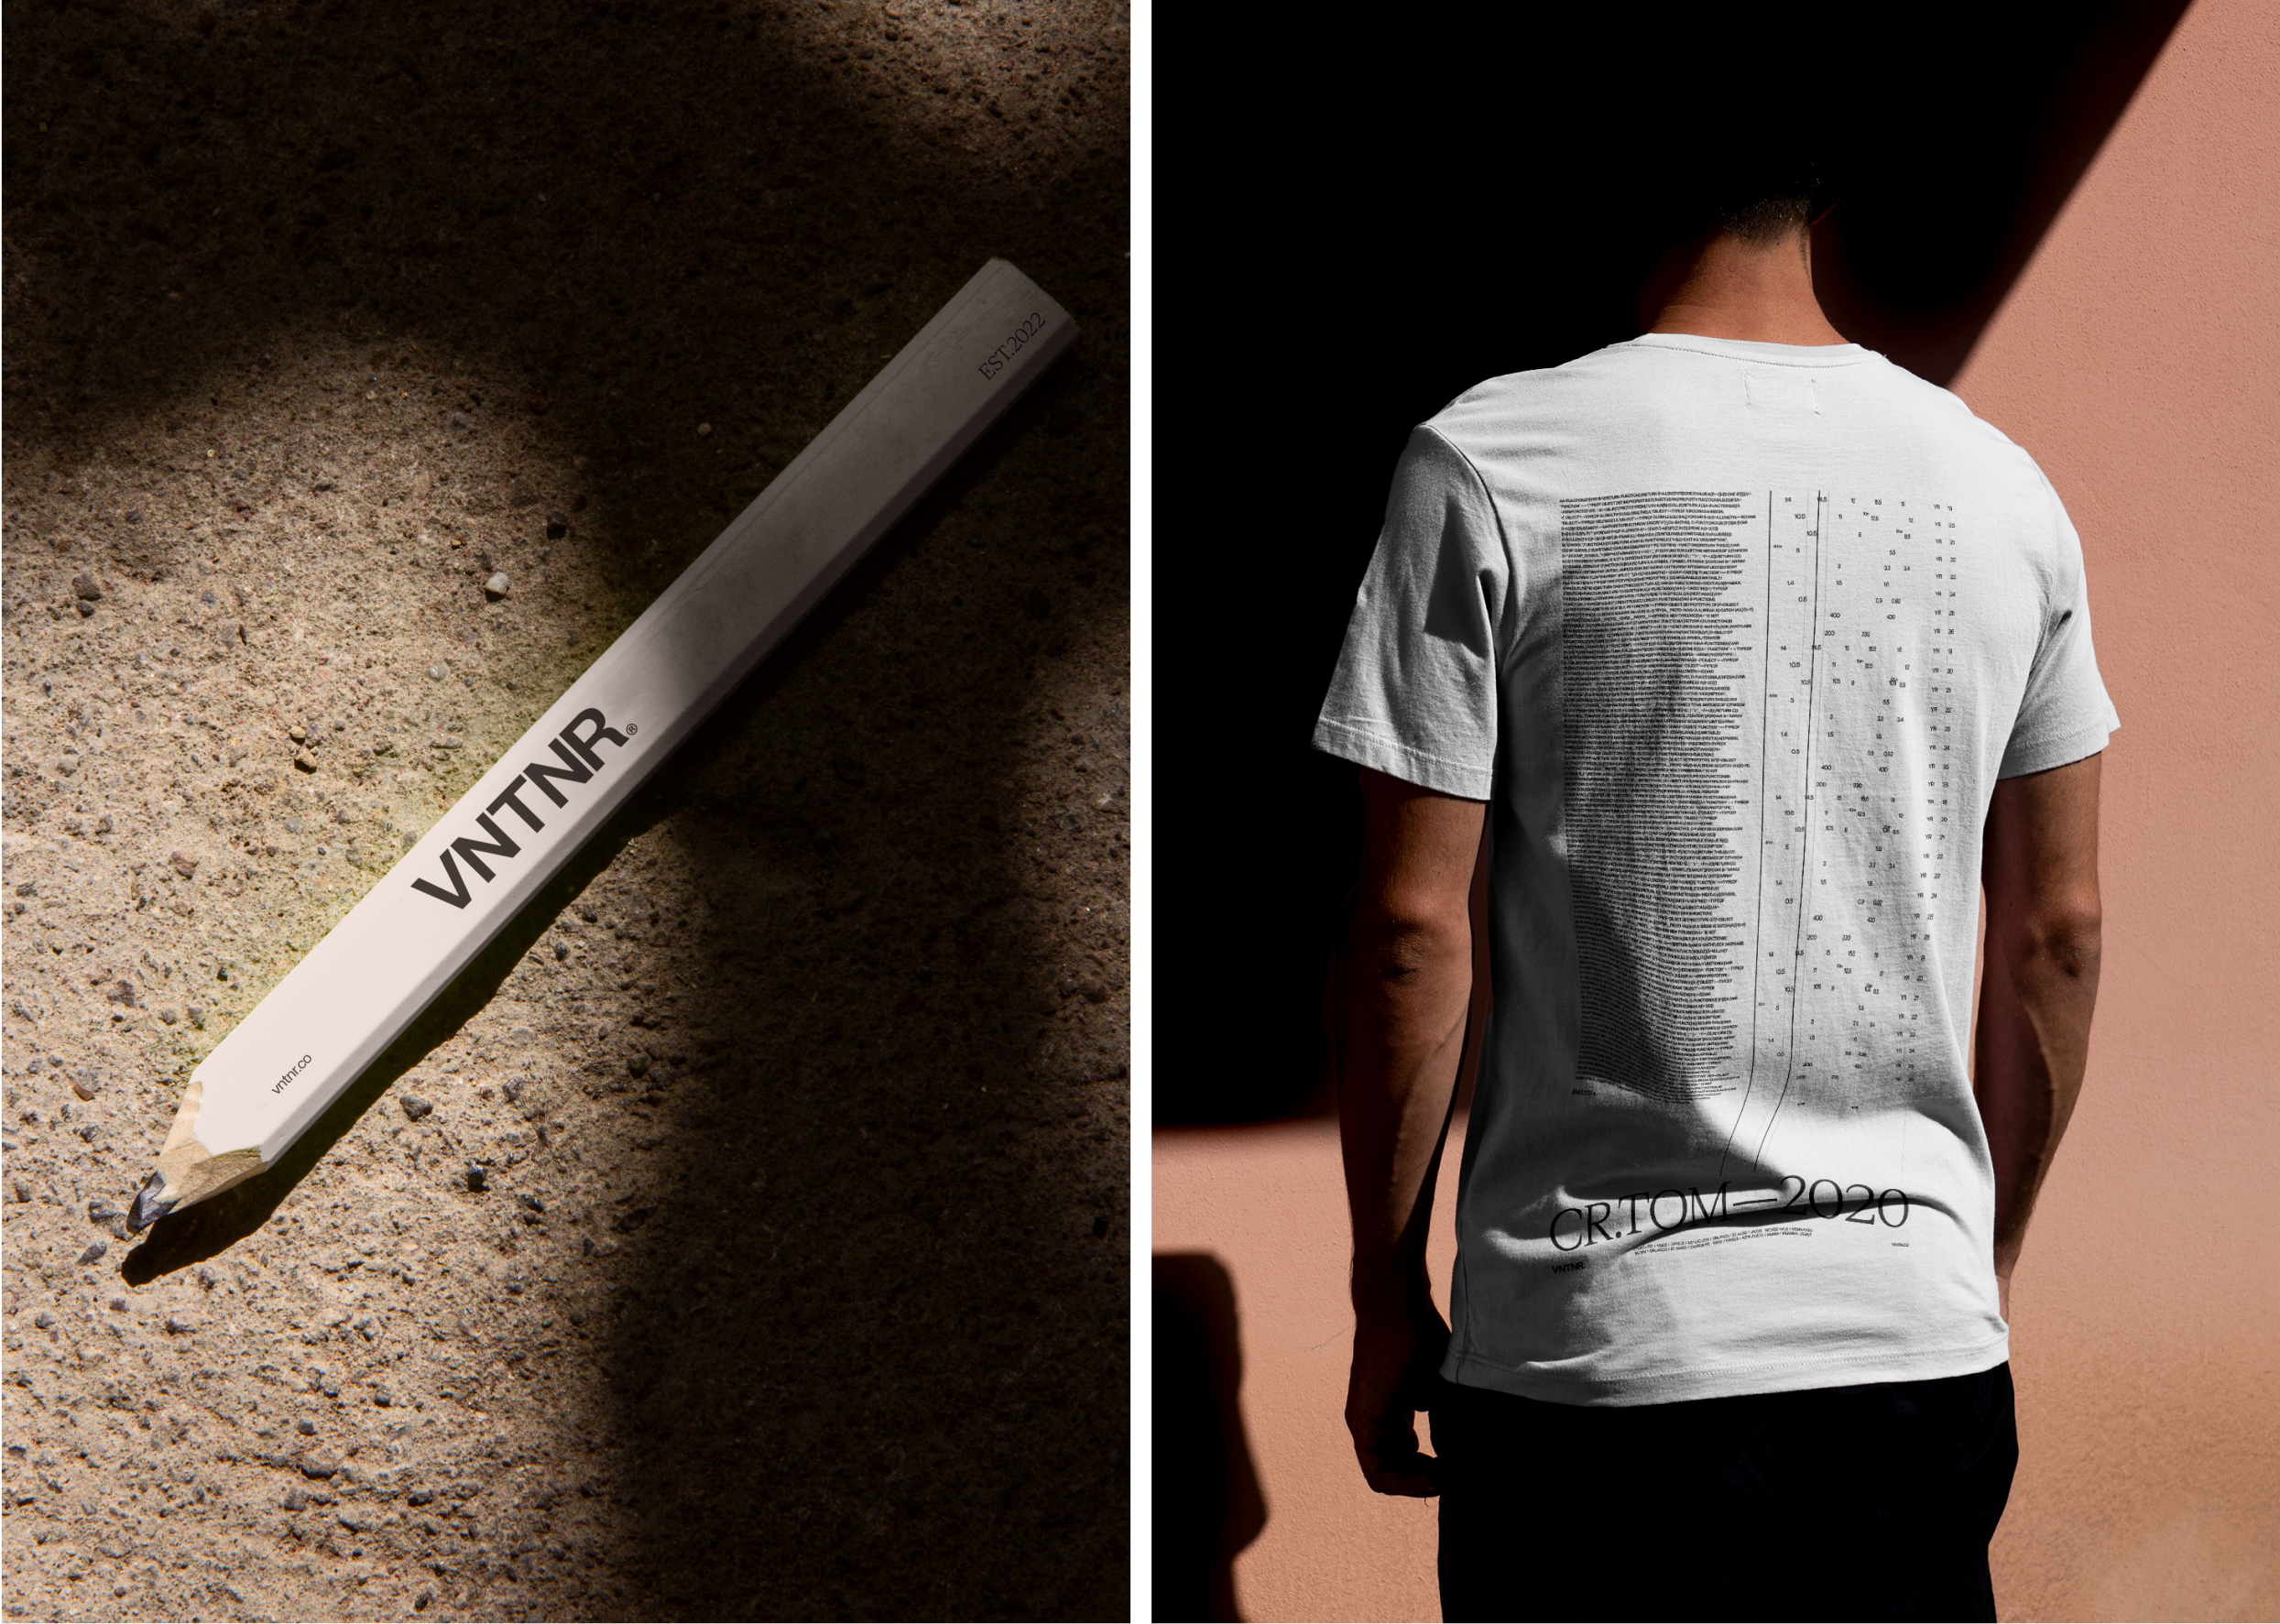 VNTNR branded pencil and t-shirt